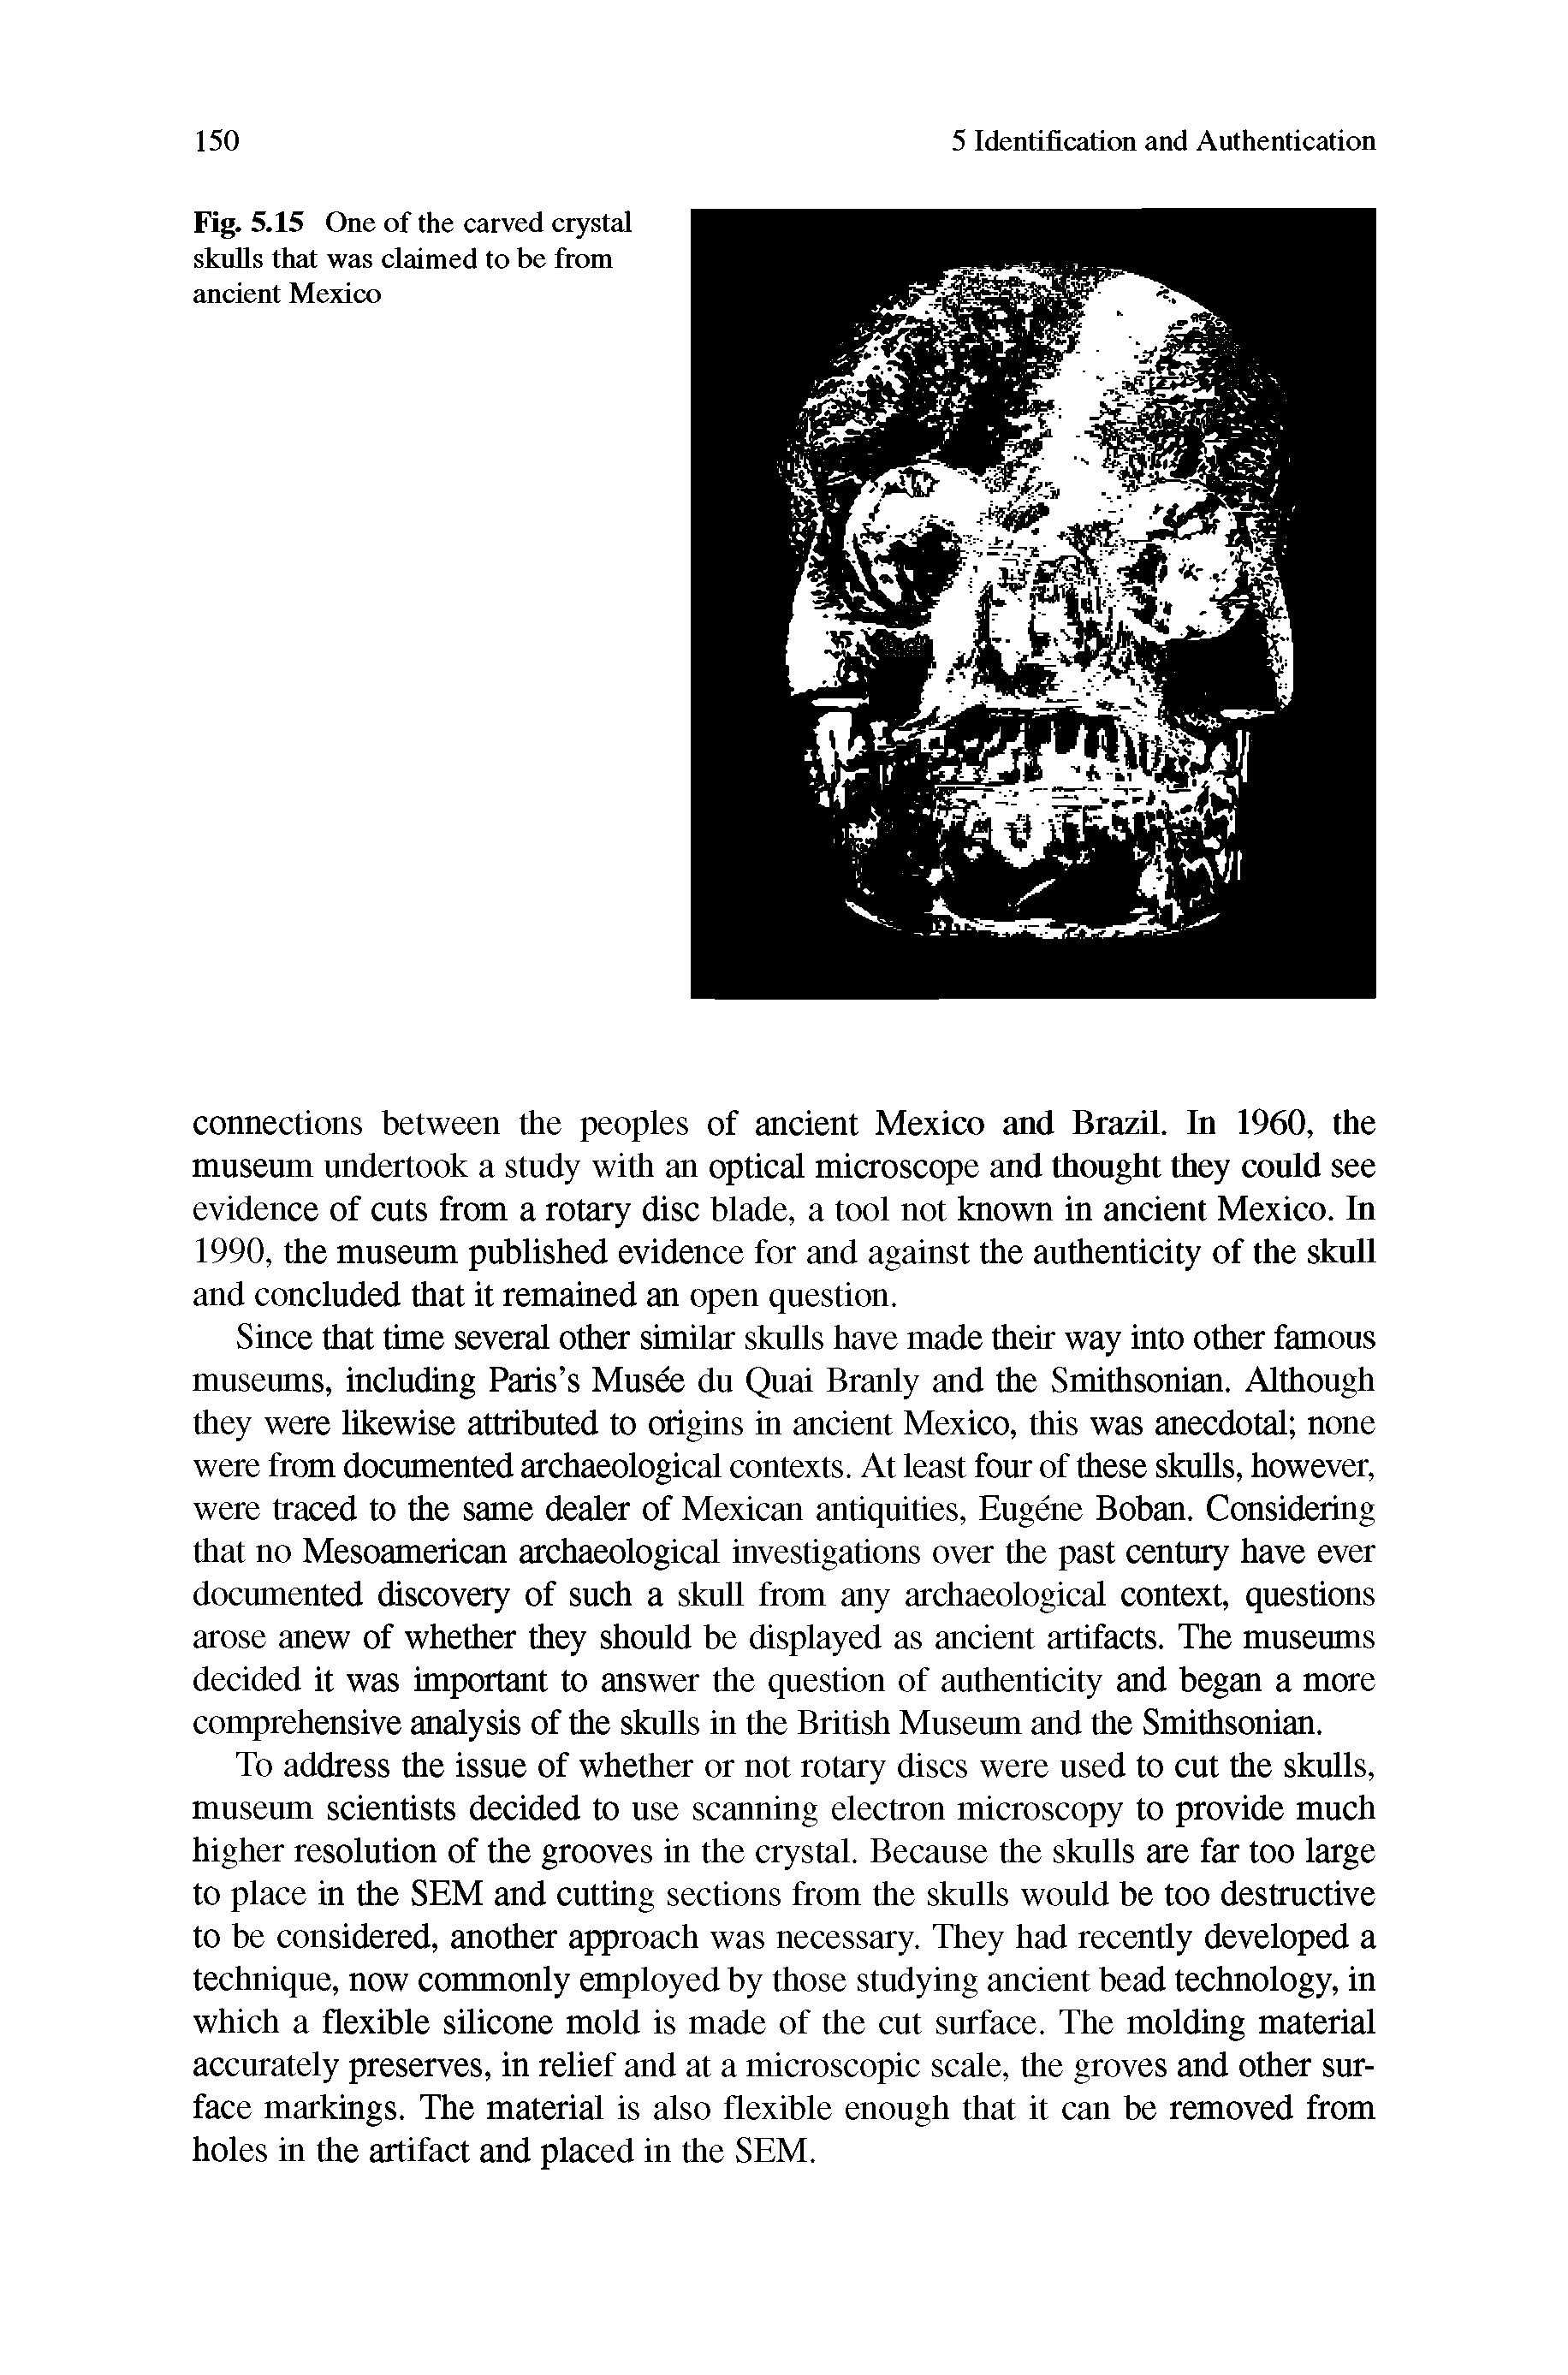 Fig. 5.15 One of the carved crystal skulls that was claimed to be from ancient Mexico...